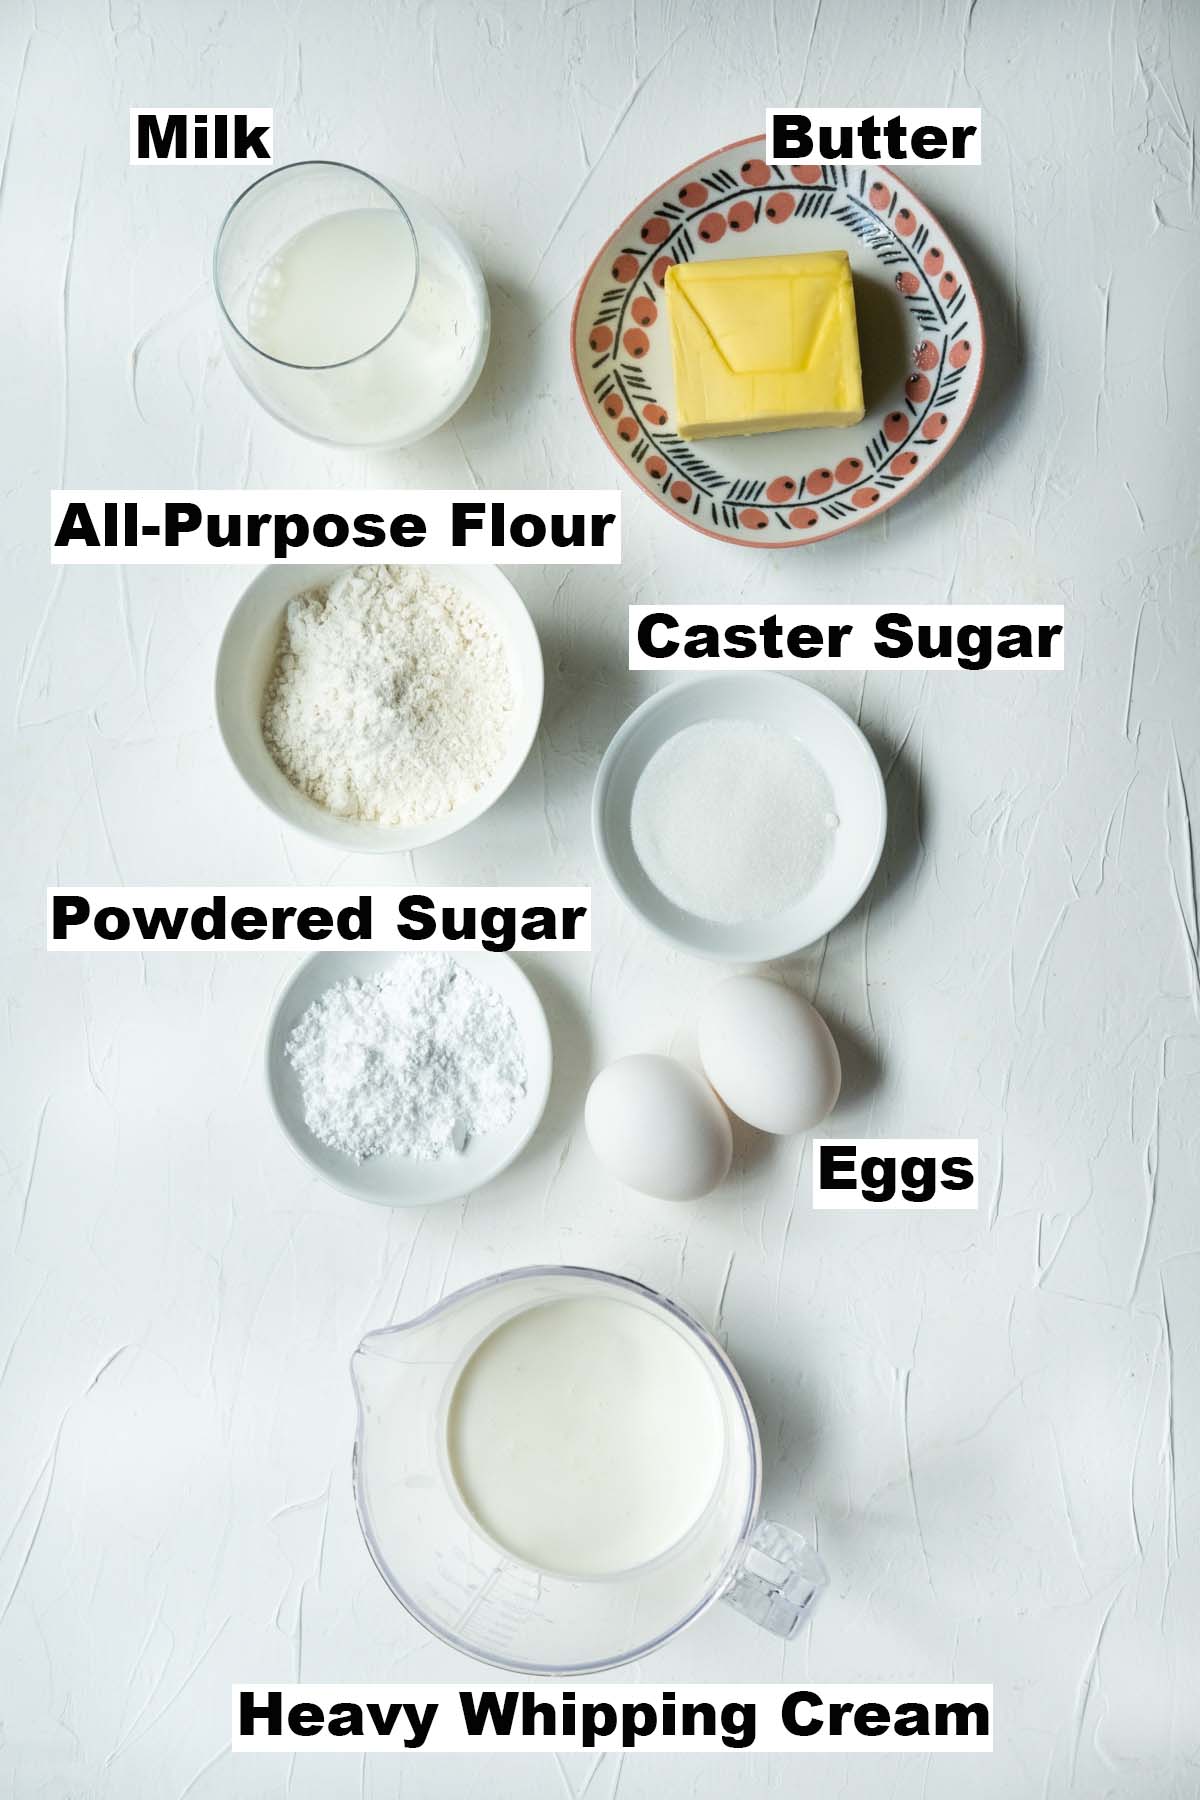 Ingredients for cream filled choux pastry recipe. 